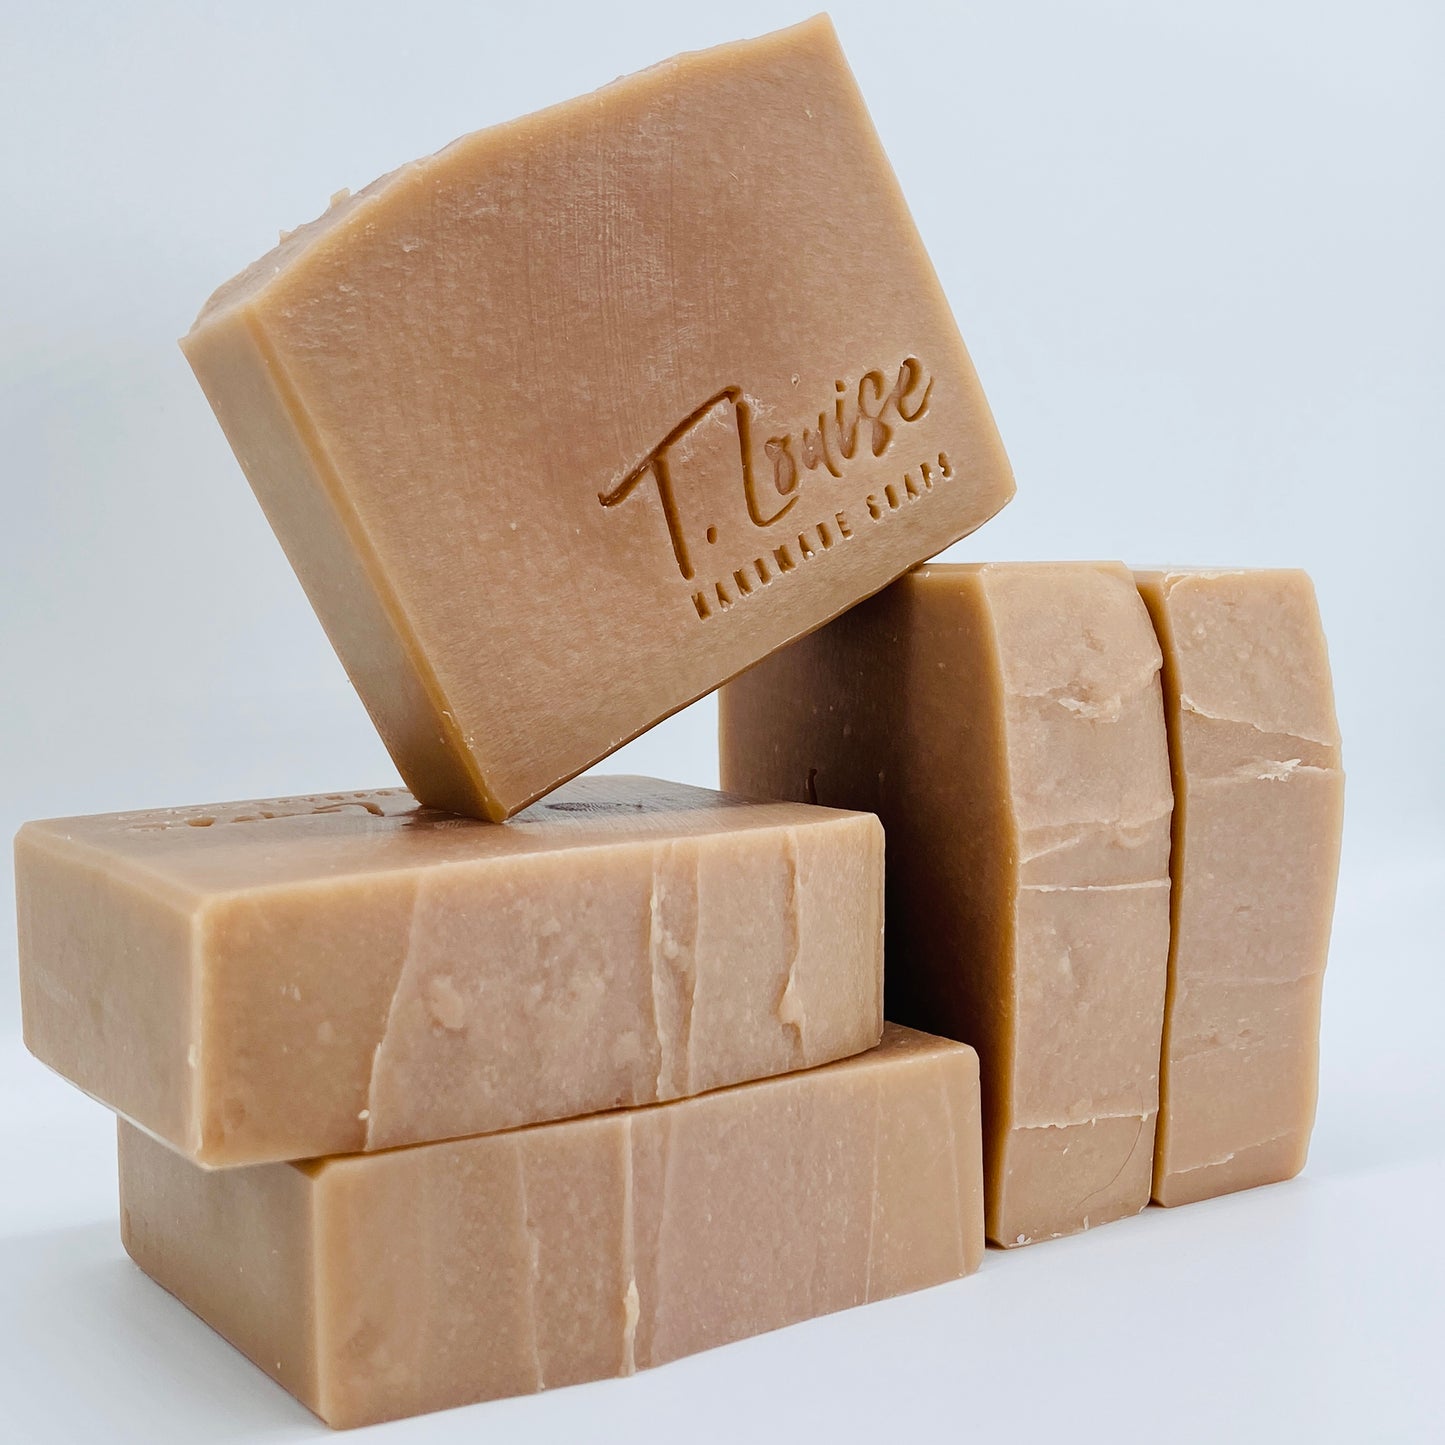 Mulberry & Thyme Soap, T. Louise Soaps - Coconut free soaps